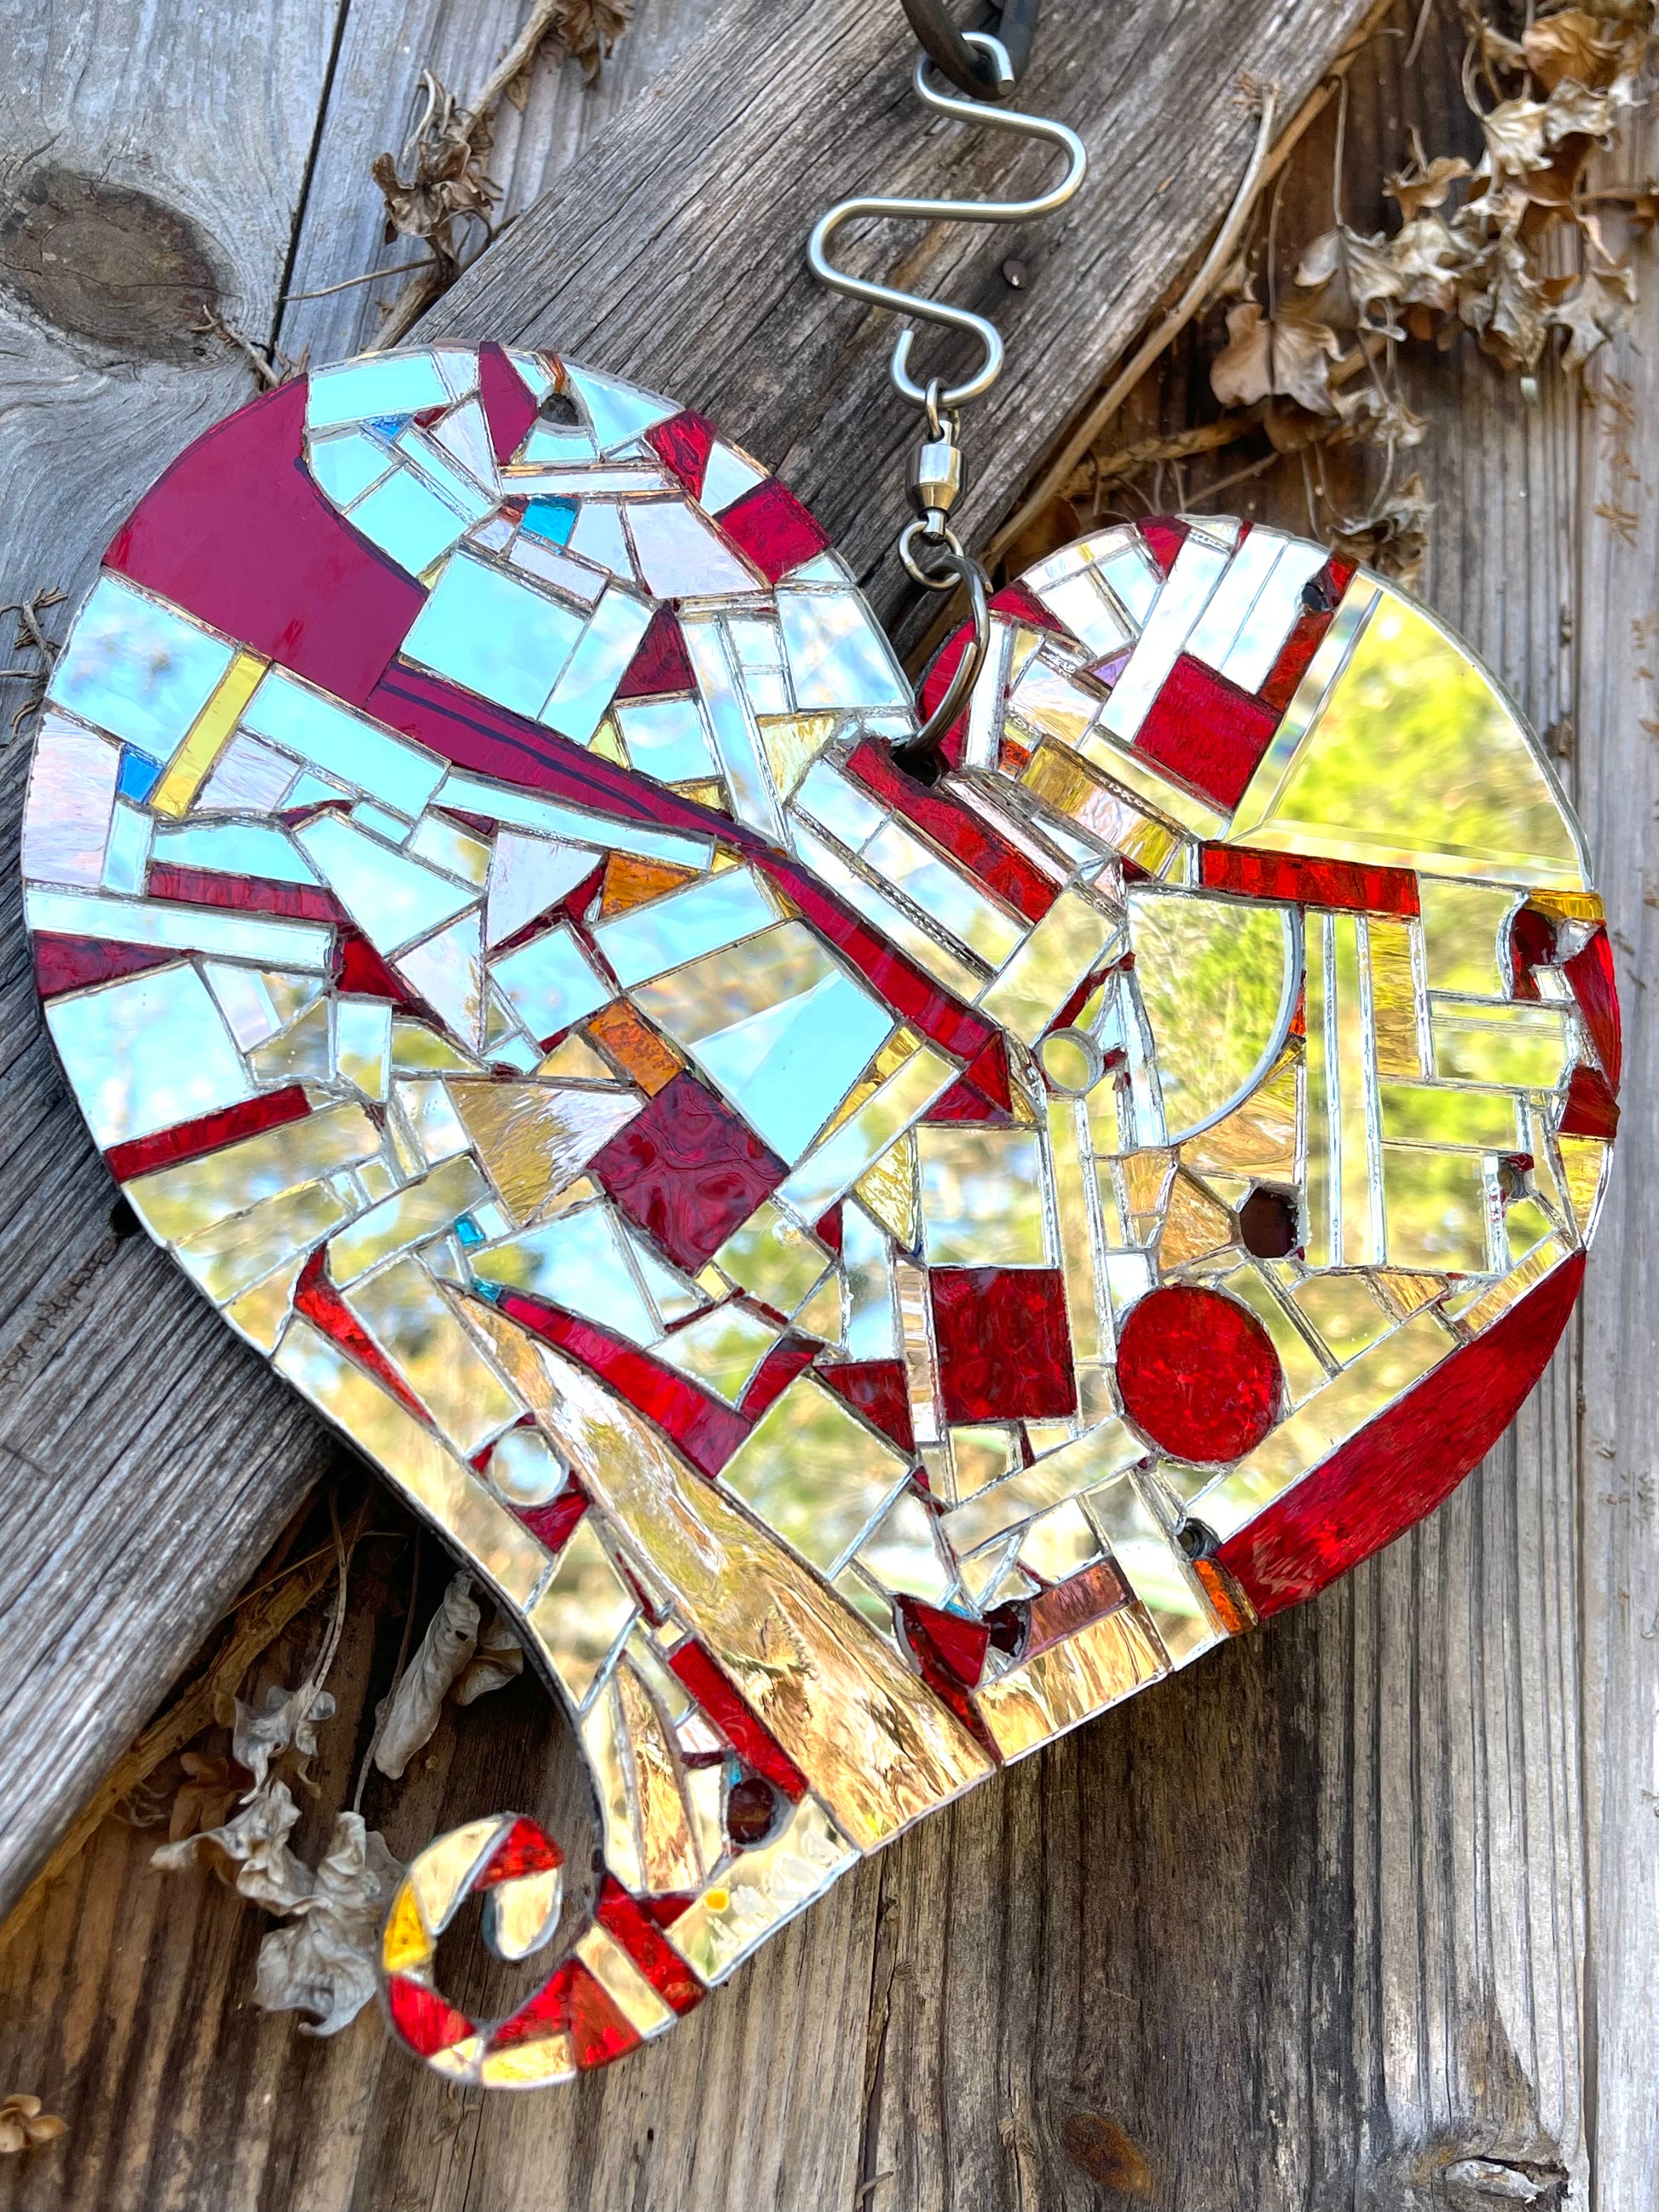 Beautiful mirror mosaic heart sun catcher. Red and silver on one side, blue and silver on the other.